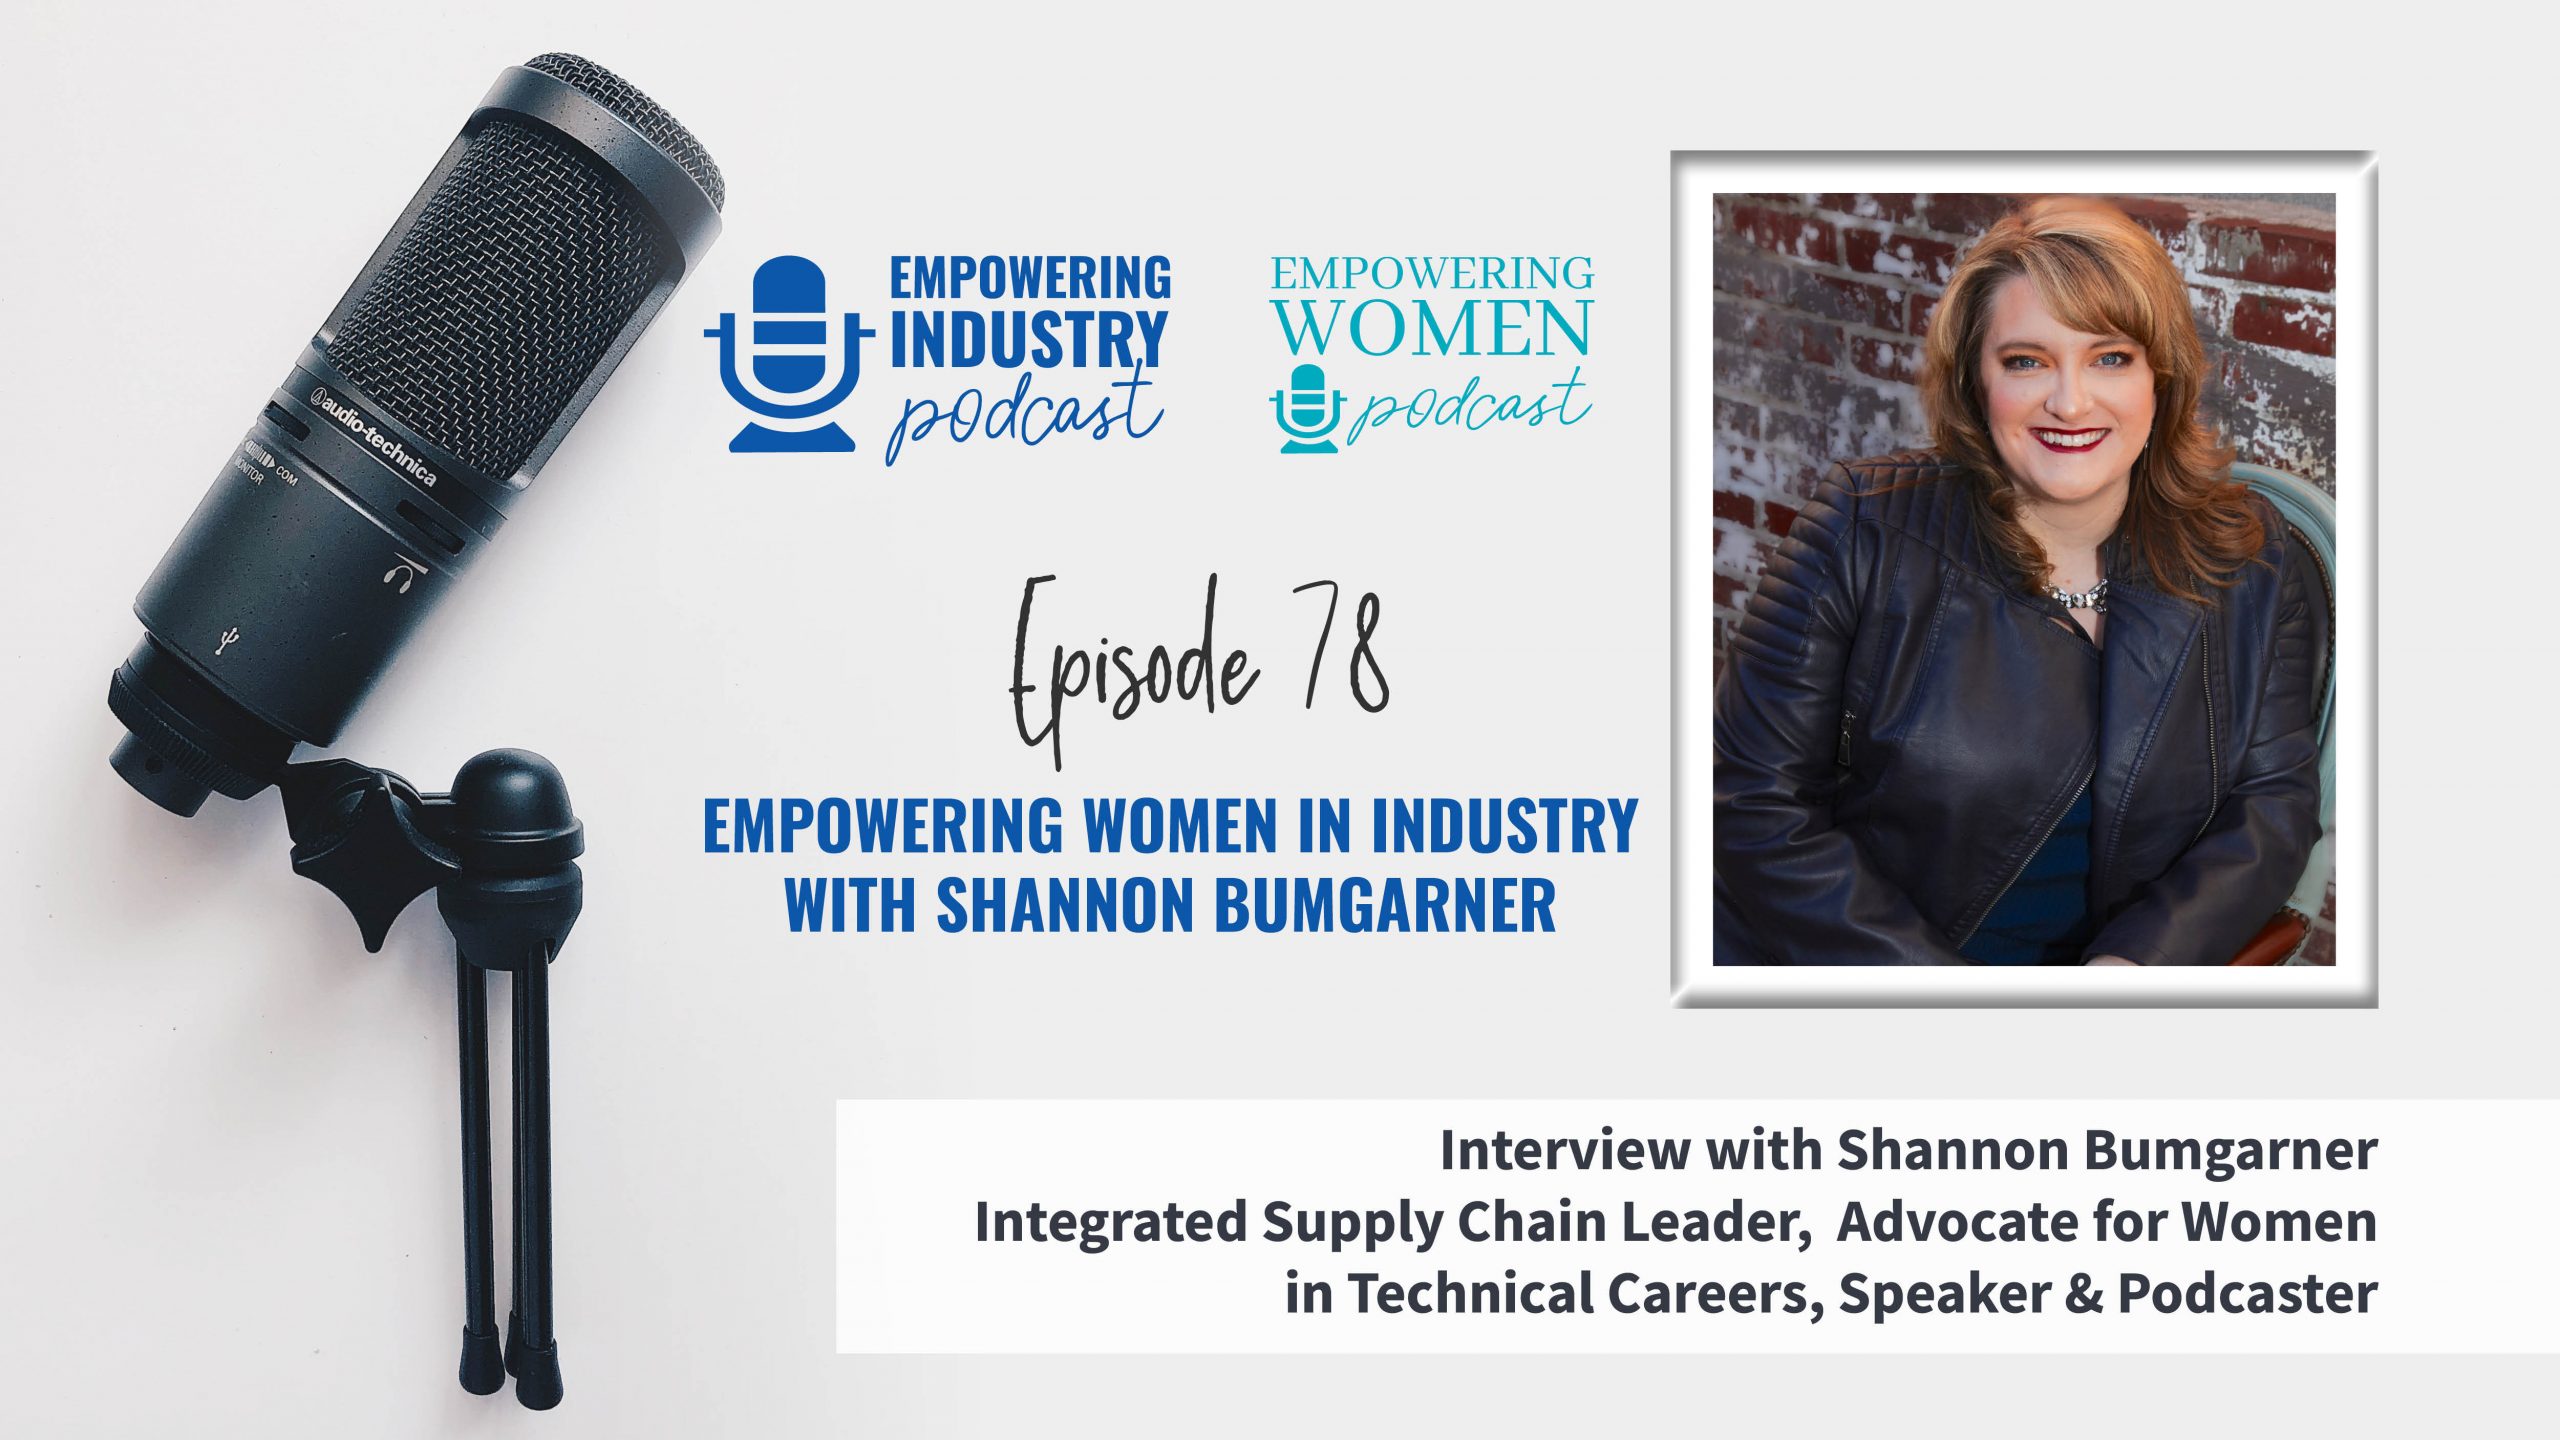 Empowering Women in Industry with Shannon Bumgarner